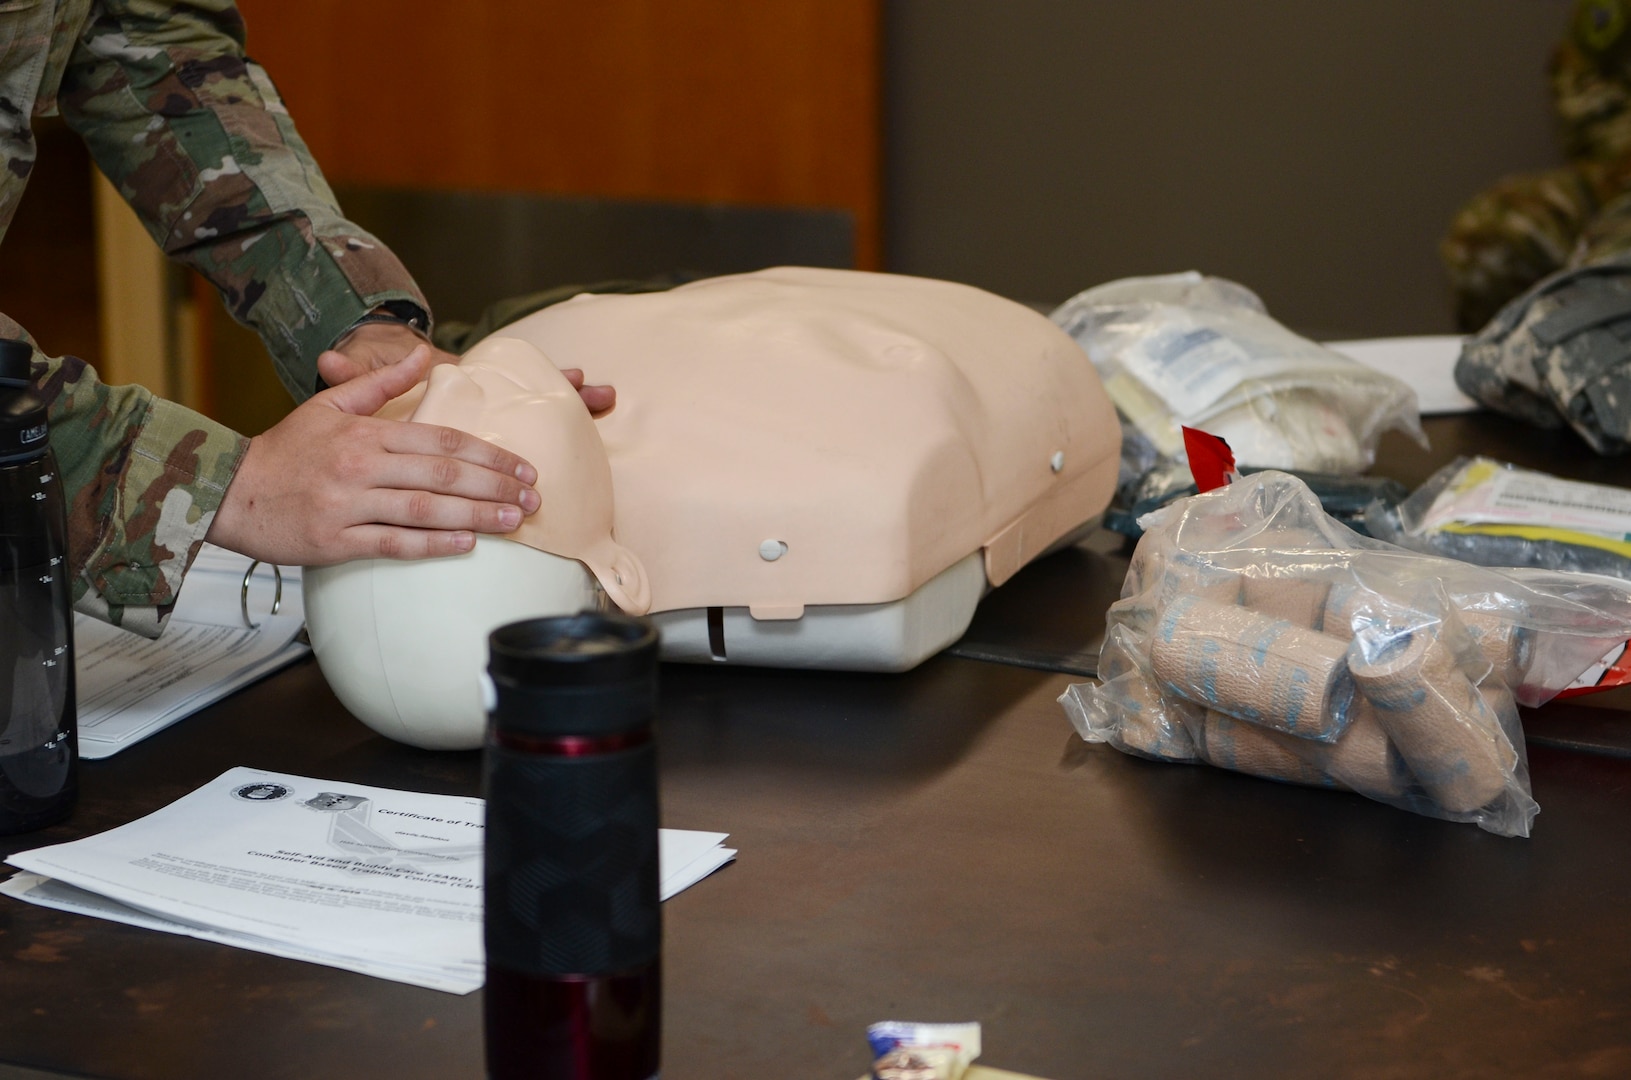 Self-Aid and Buddy Care course prepares deploying members for